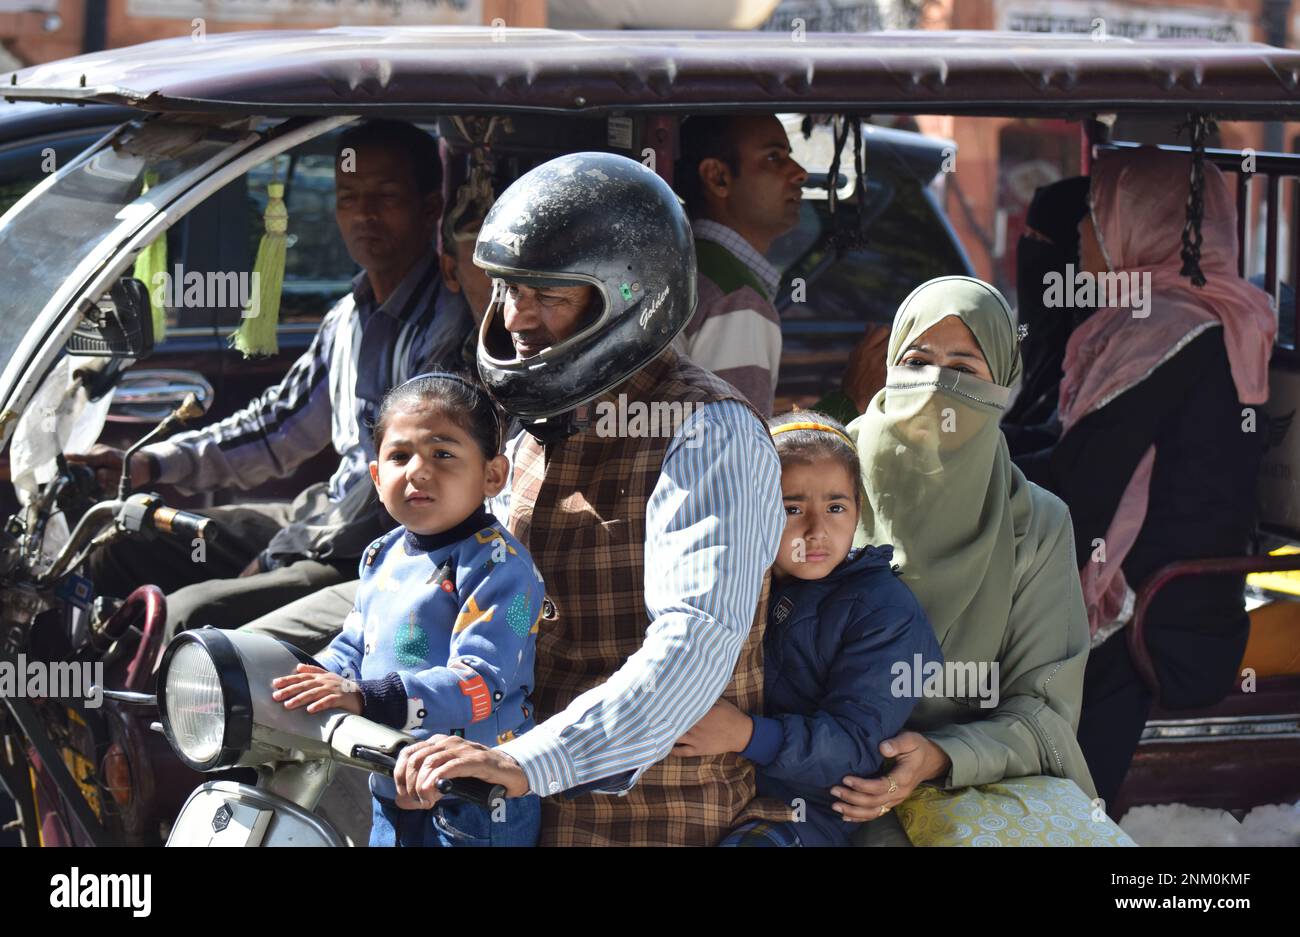 A family of 4 comprising mother, father and 2 young daughters aged approximately 3 and 6 all riding on a motorcycle together with the father driving Stock Photo